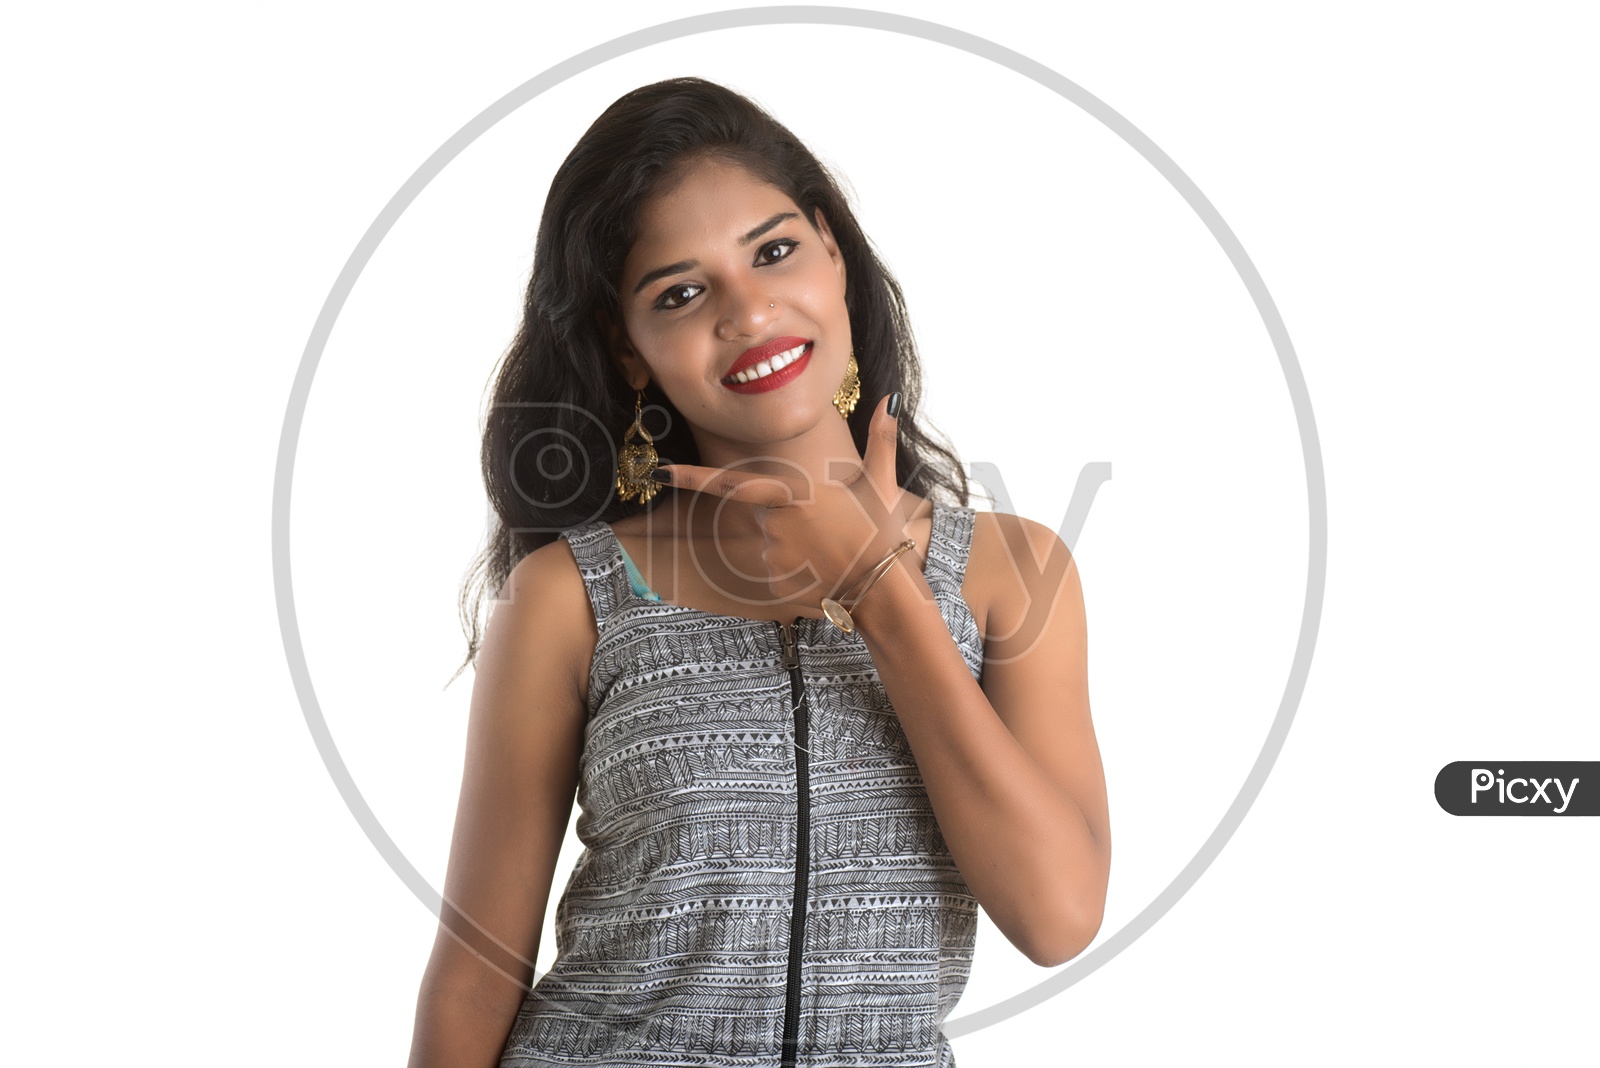 Pretty Young Girl With a Expression And Gesture  On Face And Posing On an Isolated White Background